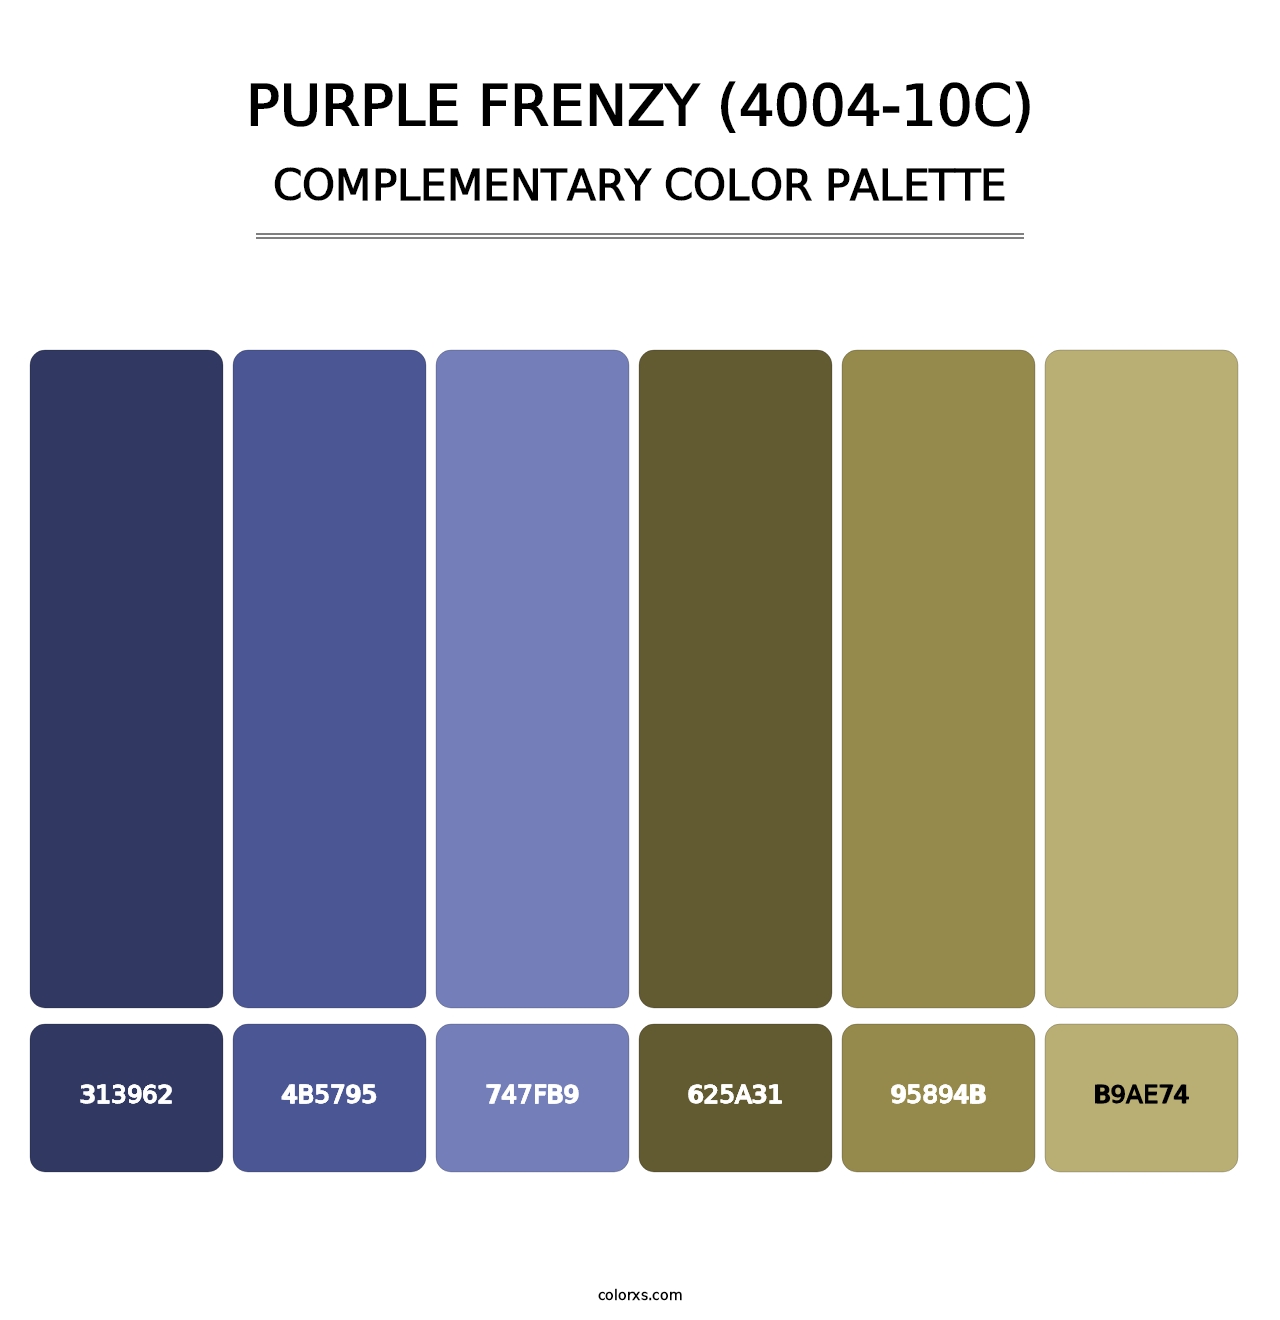 Purple Frenzy (4004-10C) - Complementary Color Palette